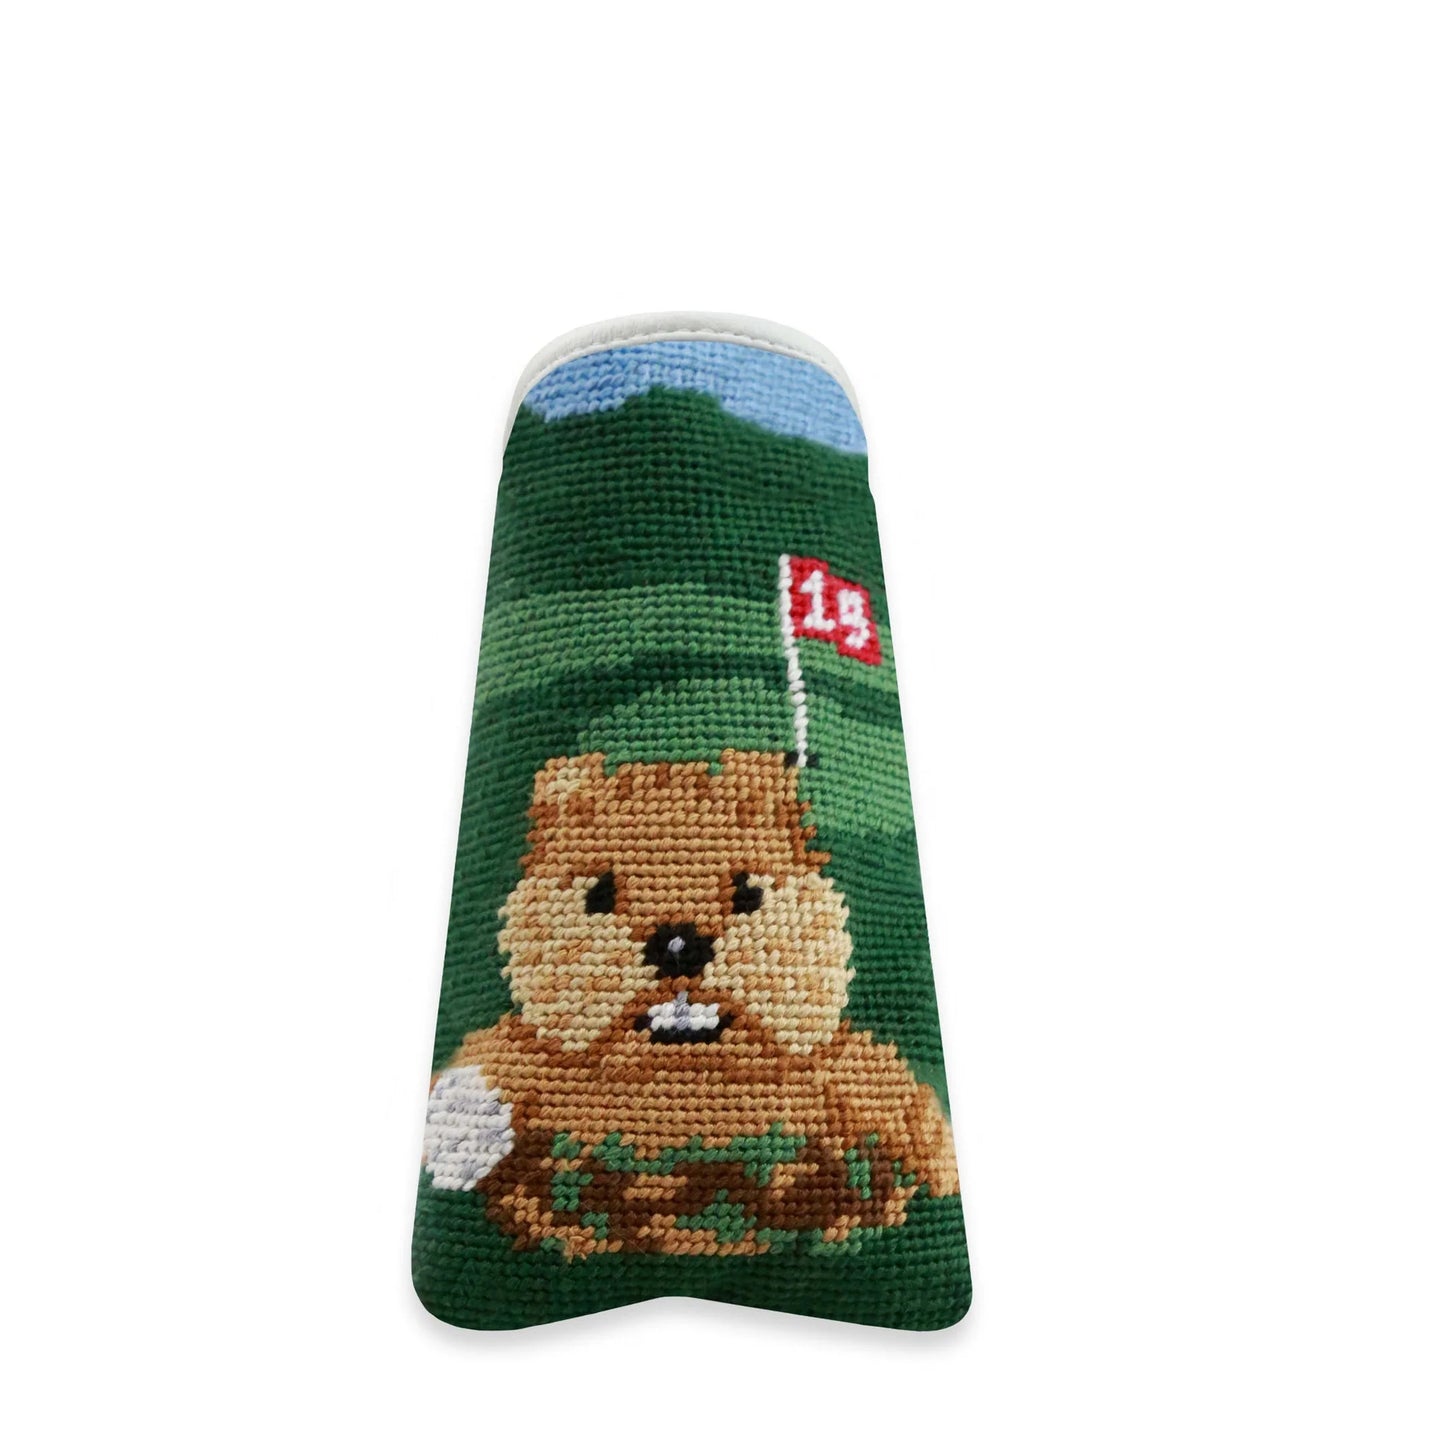 Needlepoint Putter Golf Cover - CALL TO SPECIAL ORDER